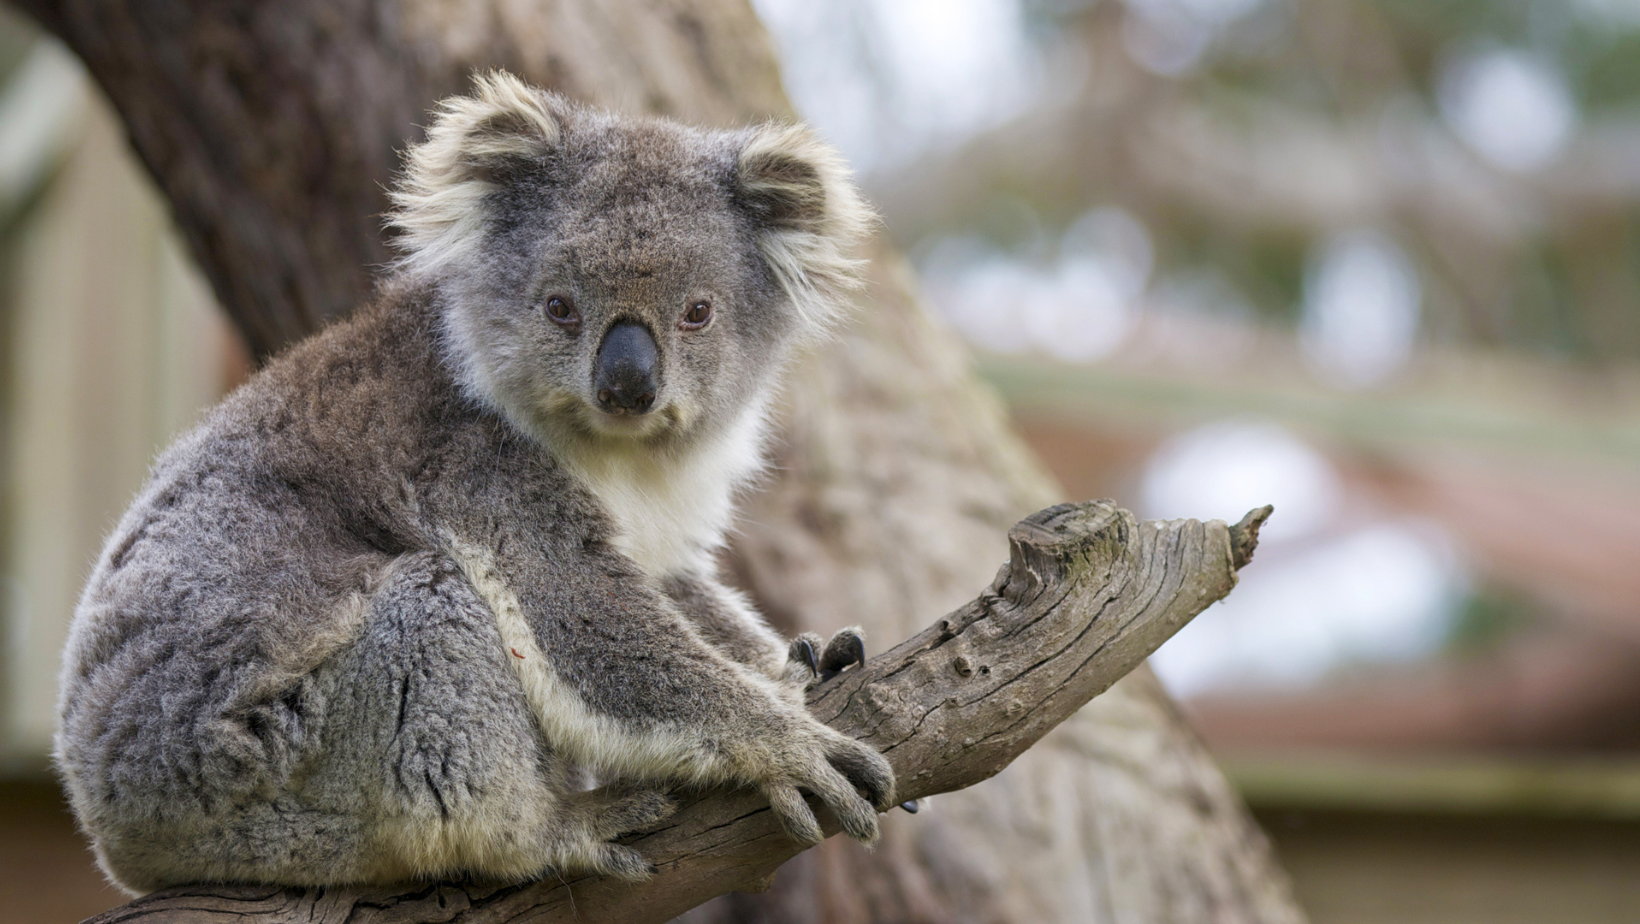 Illumina and the San Diego Zoo are sequencing koala genomes to